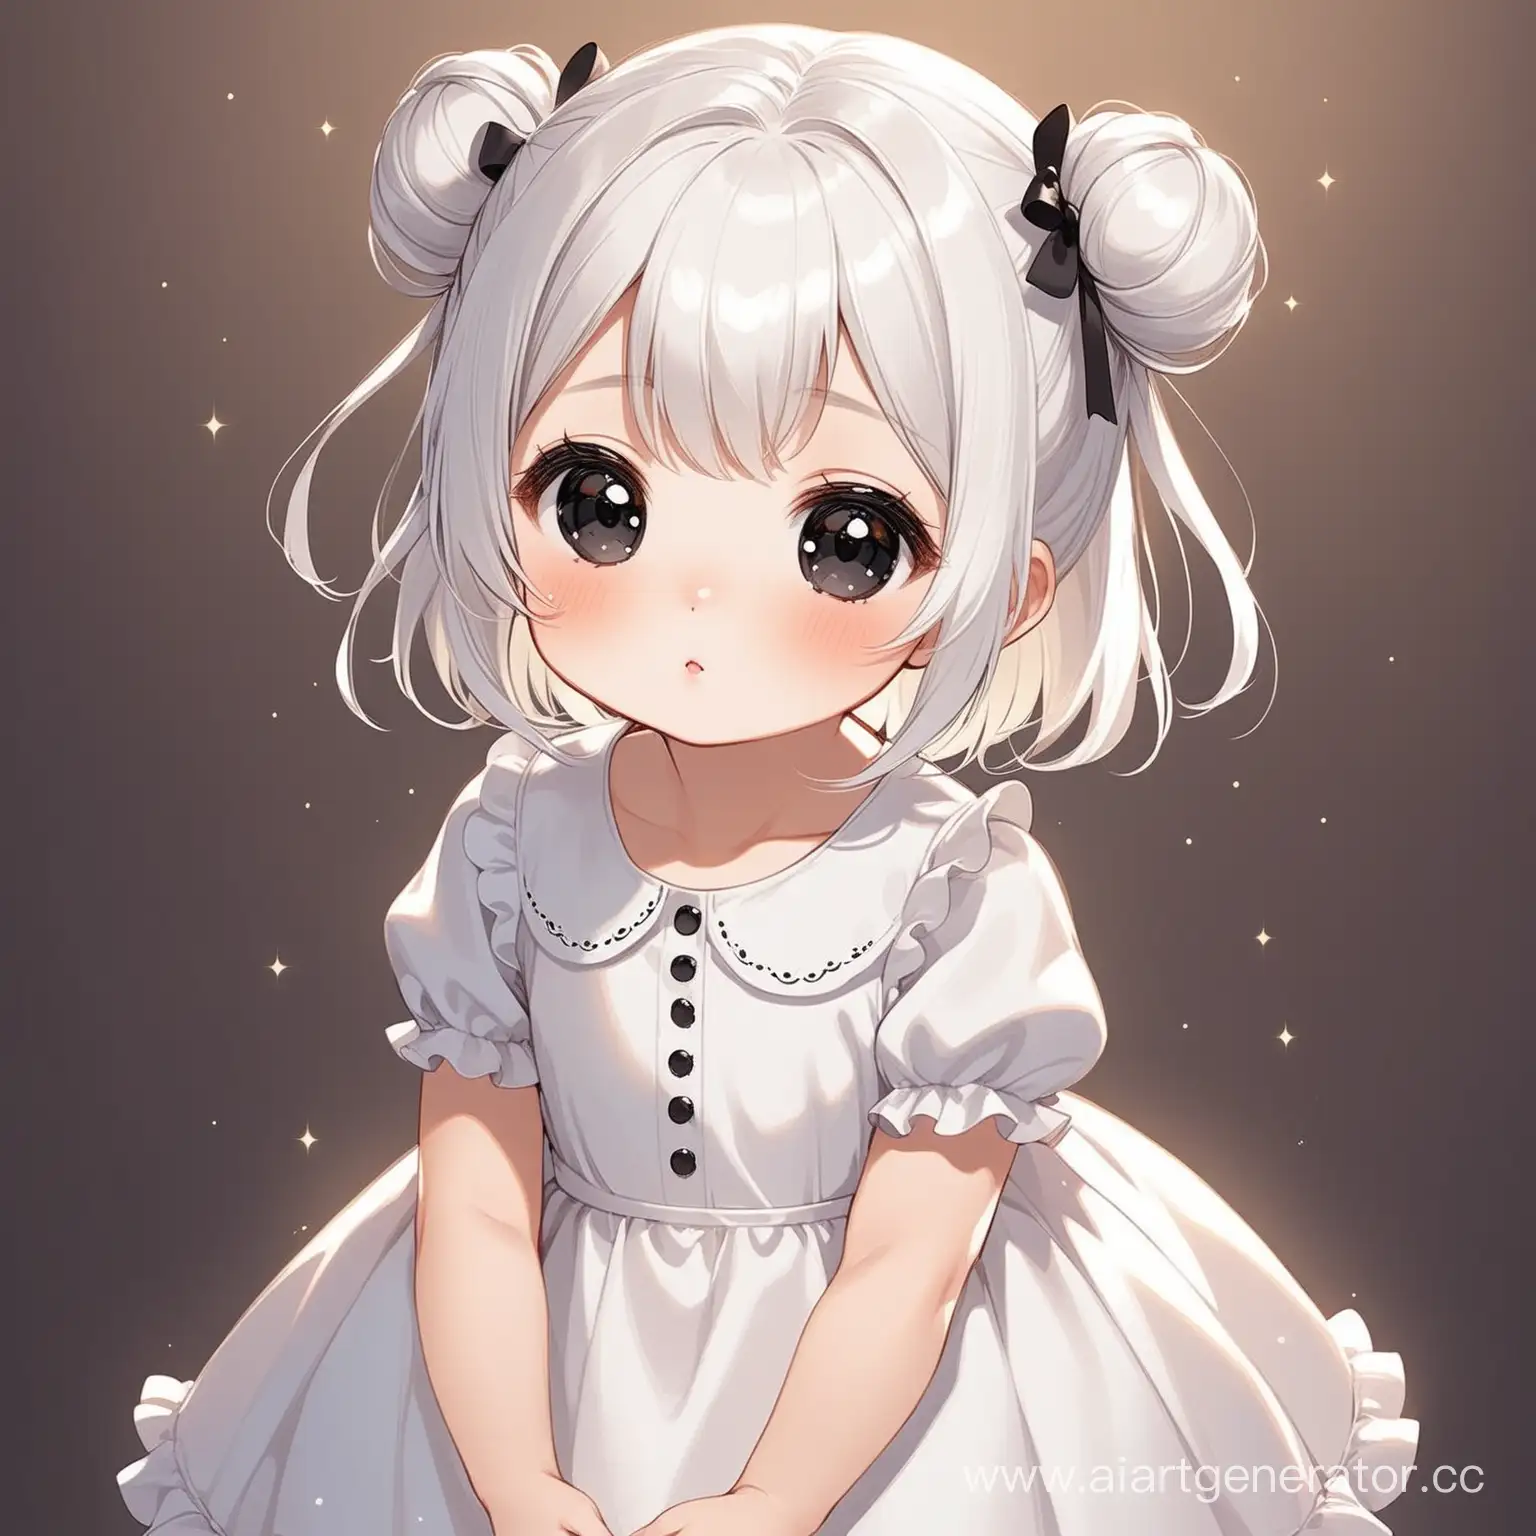 Adorable-Little-Girl-with-White-Hair-Buns-and-Cute-Dress